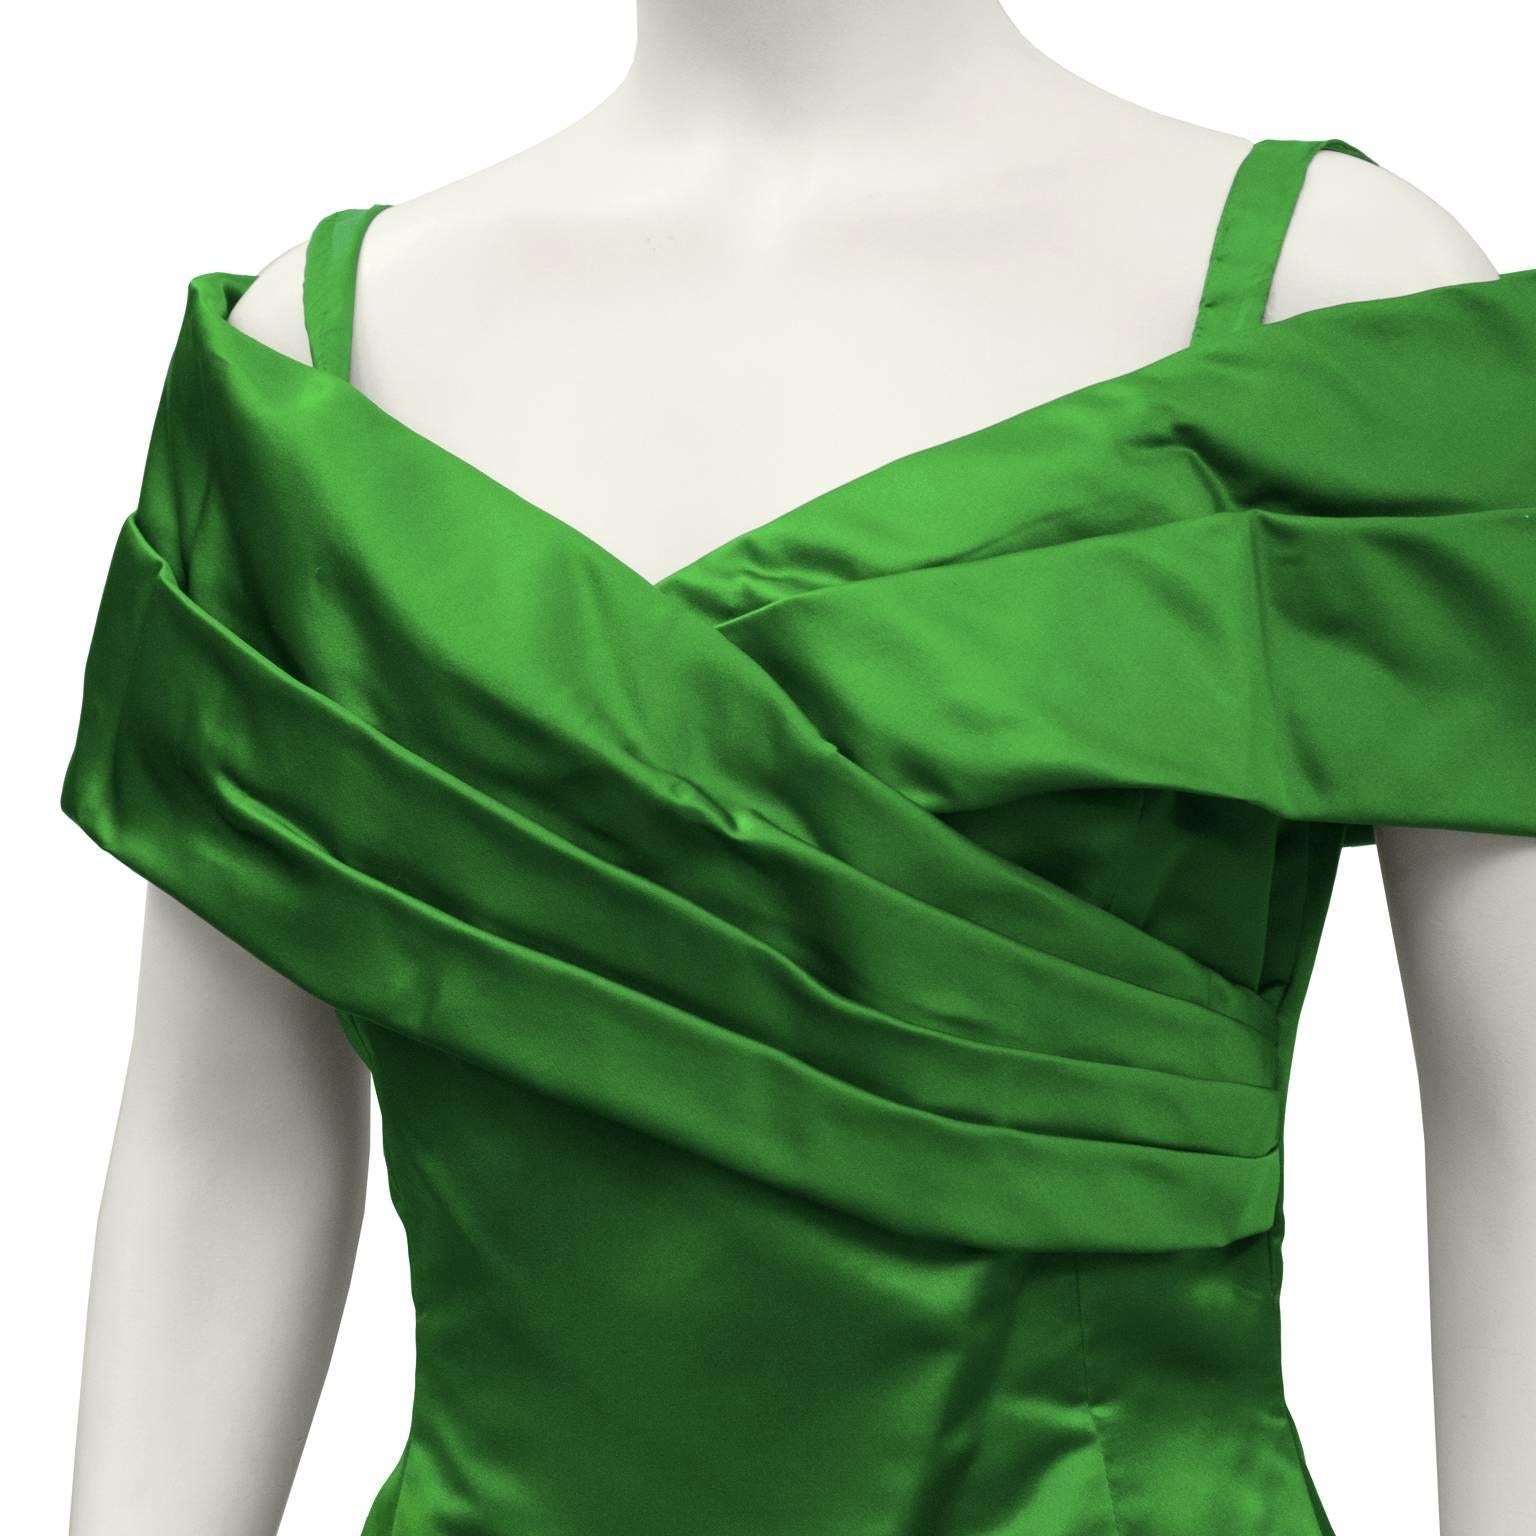 the green satin gown answer key